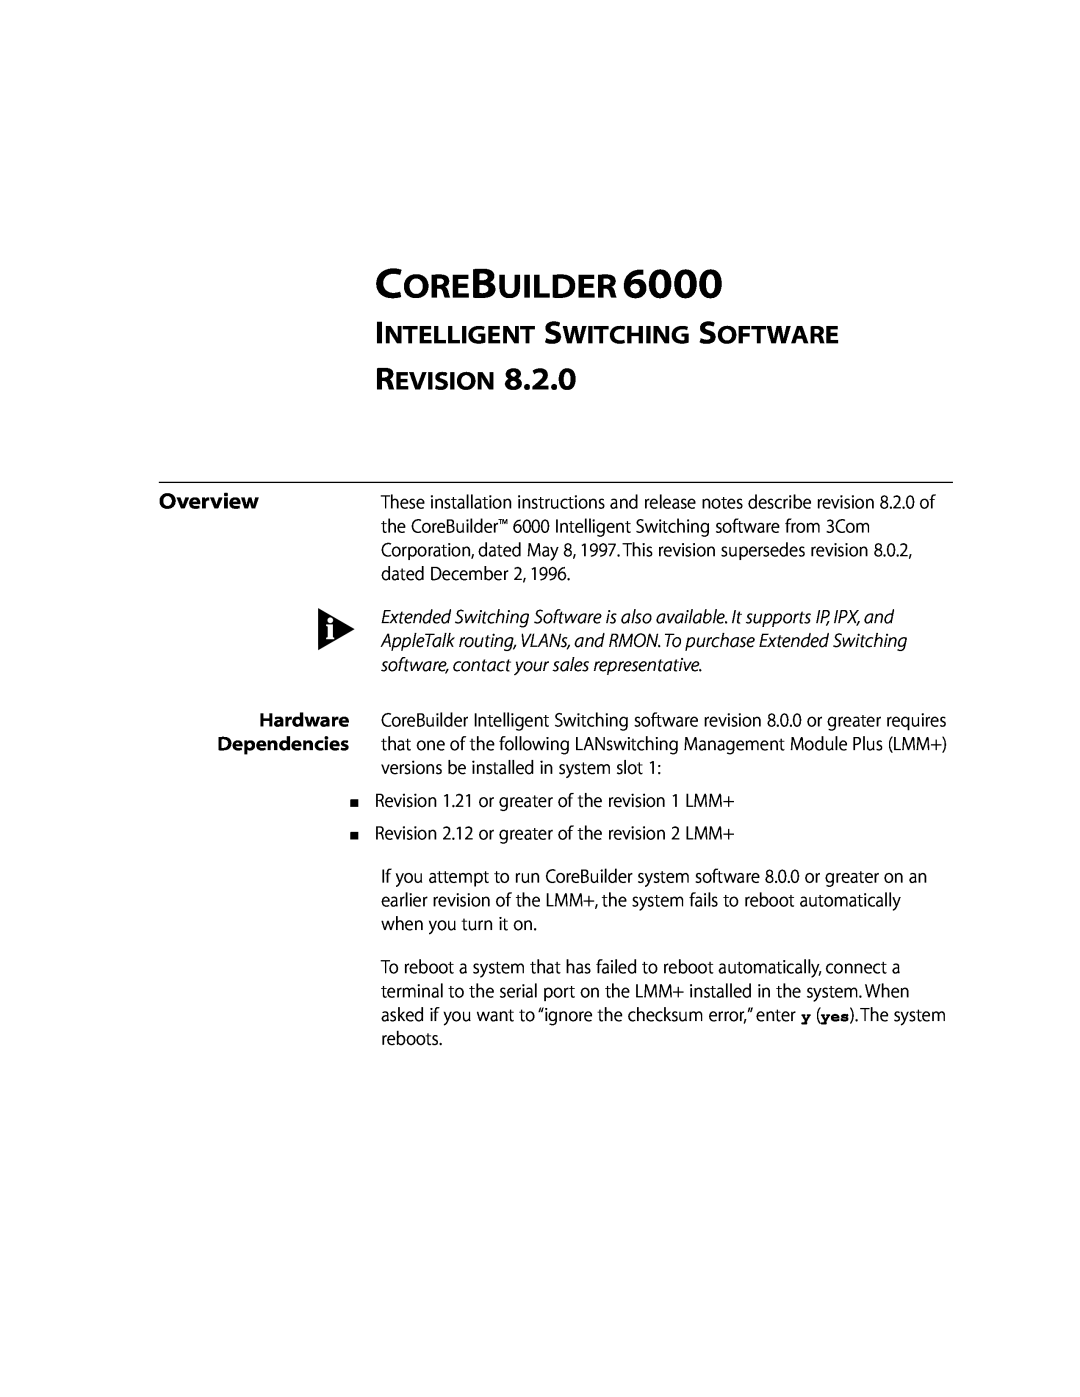 3Com 6000 Corebuilder, Overview, software, contact your sales representative, Intelligent Switching Software Revision 